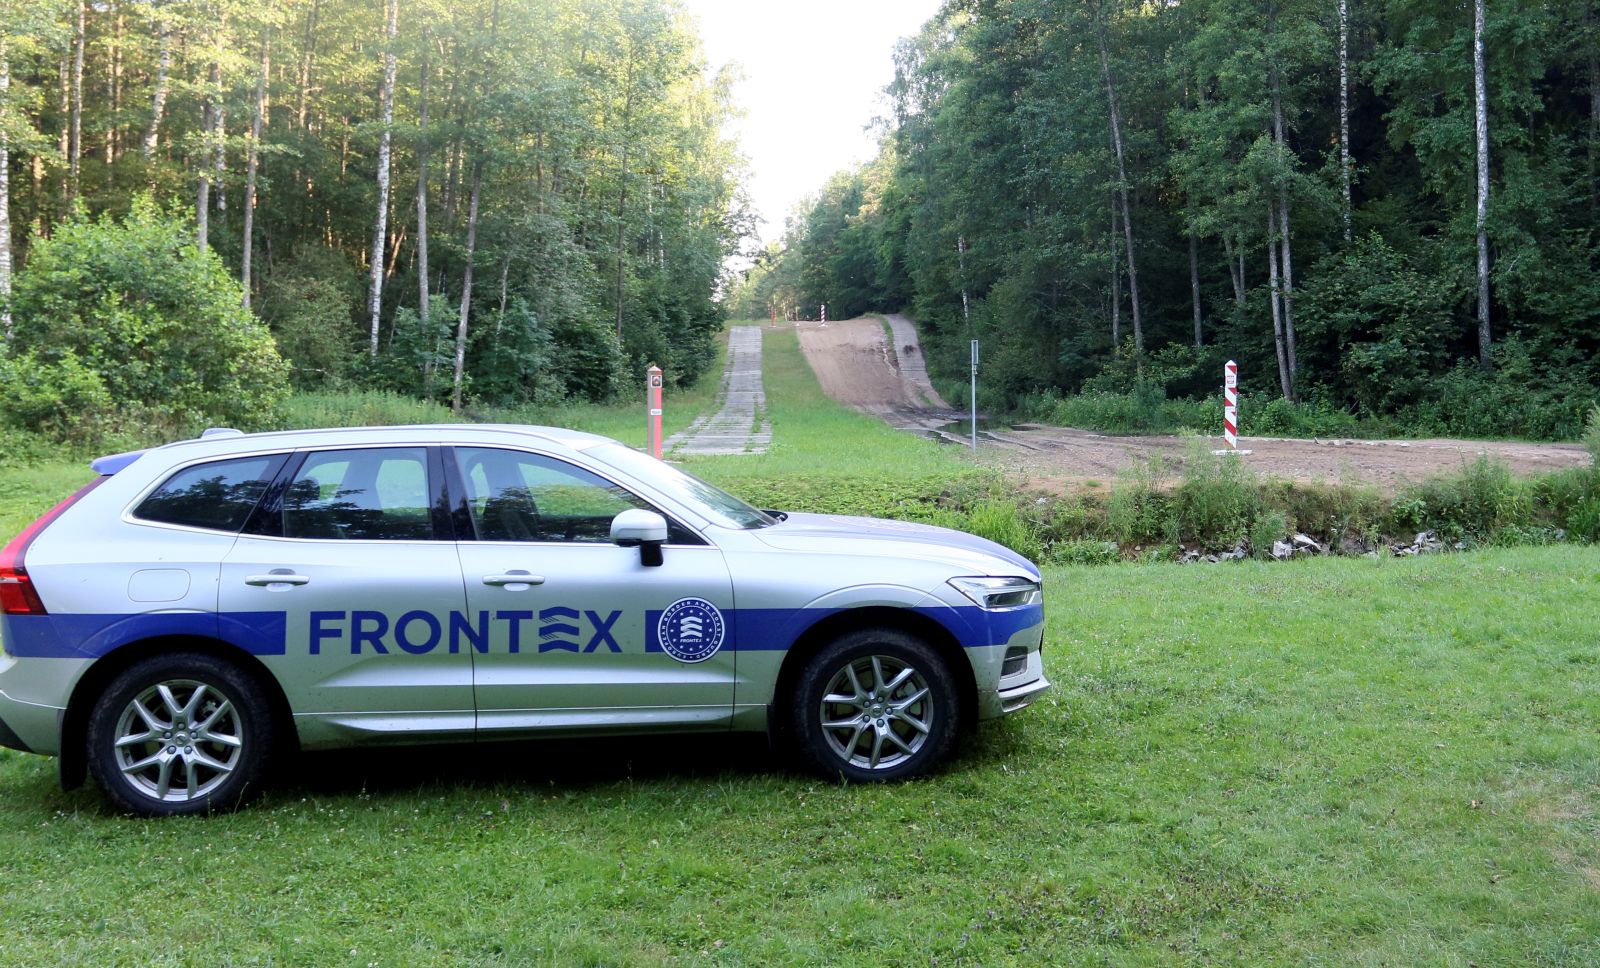 epa09353885 A vehicle of the European Union border agency Frontex  in Kapciamiestis BCU, Lithuania, 19 July 2021. The European Union border agency Frontex is deploying 60 border guards to control the flows of illegal migrants from Belarus crossing the Lithuanian border. Over 1,900 migrants have been detained in Lithuania so far this year. Most of the migrants are from Iraq who have flown to Belarus on direct flights from Baghdad and Istanbul.  EPA/STR